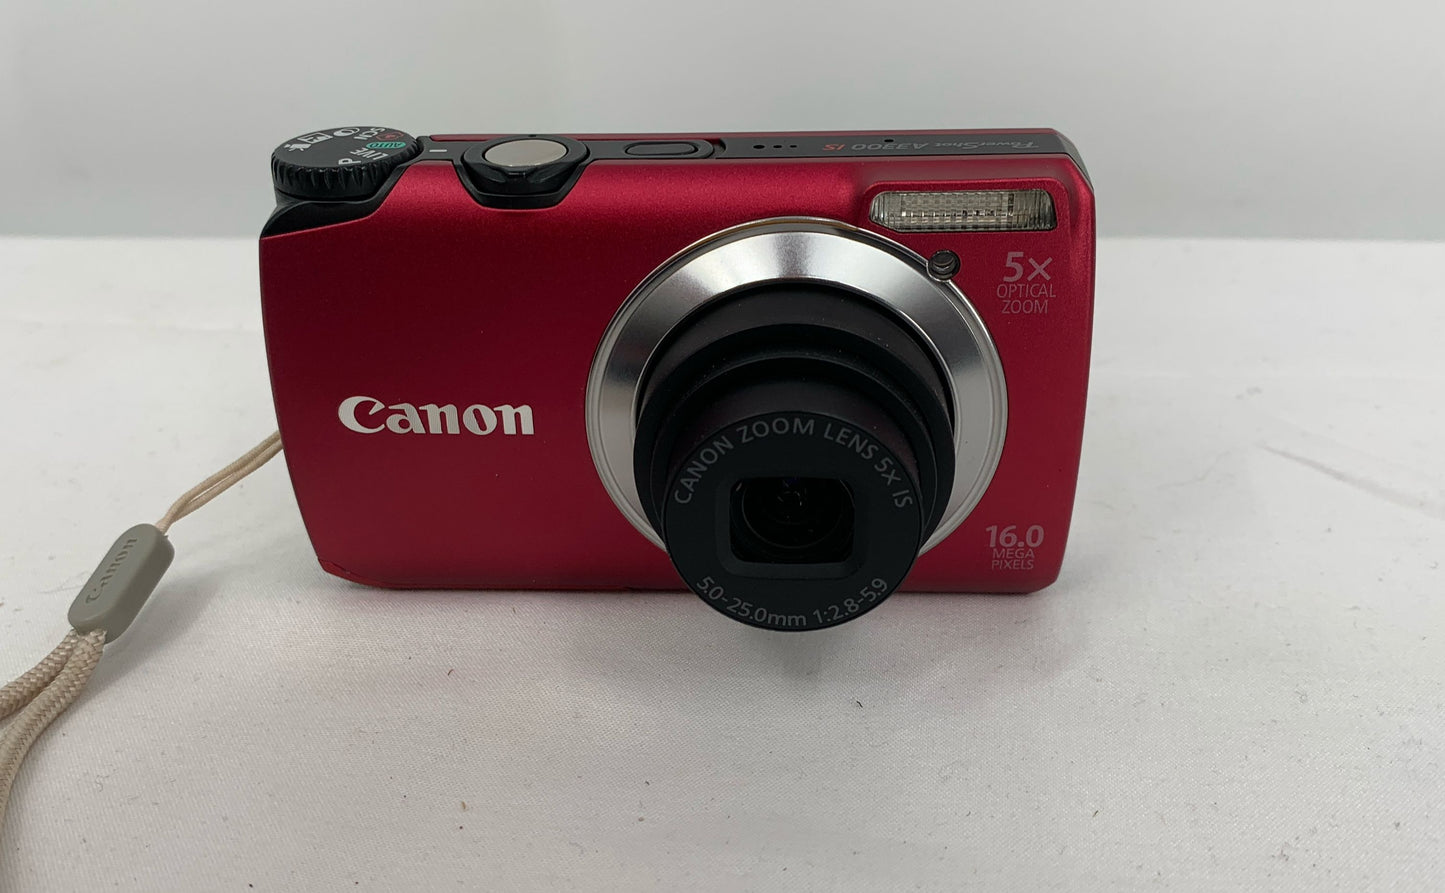 Canon Powershot A3300 IS 16 MP Digital Camera With 5X Optical Zoom Maroon